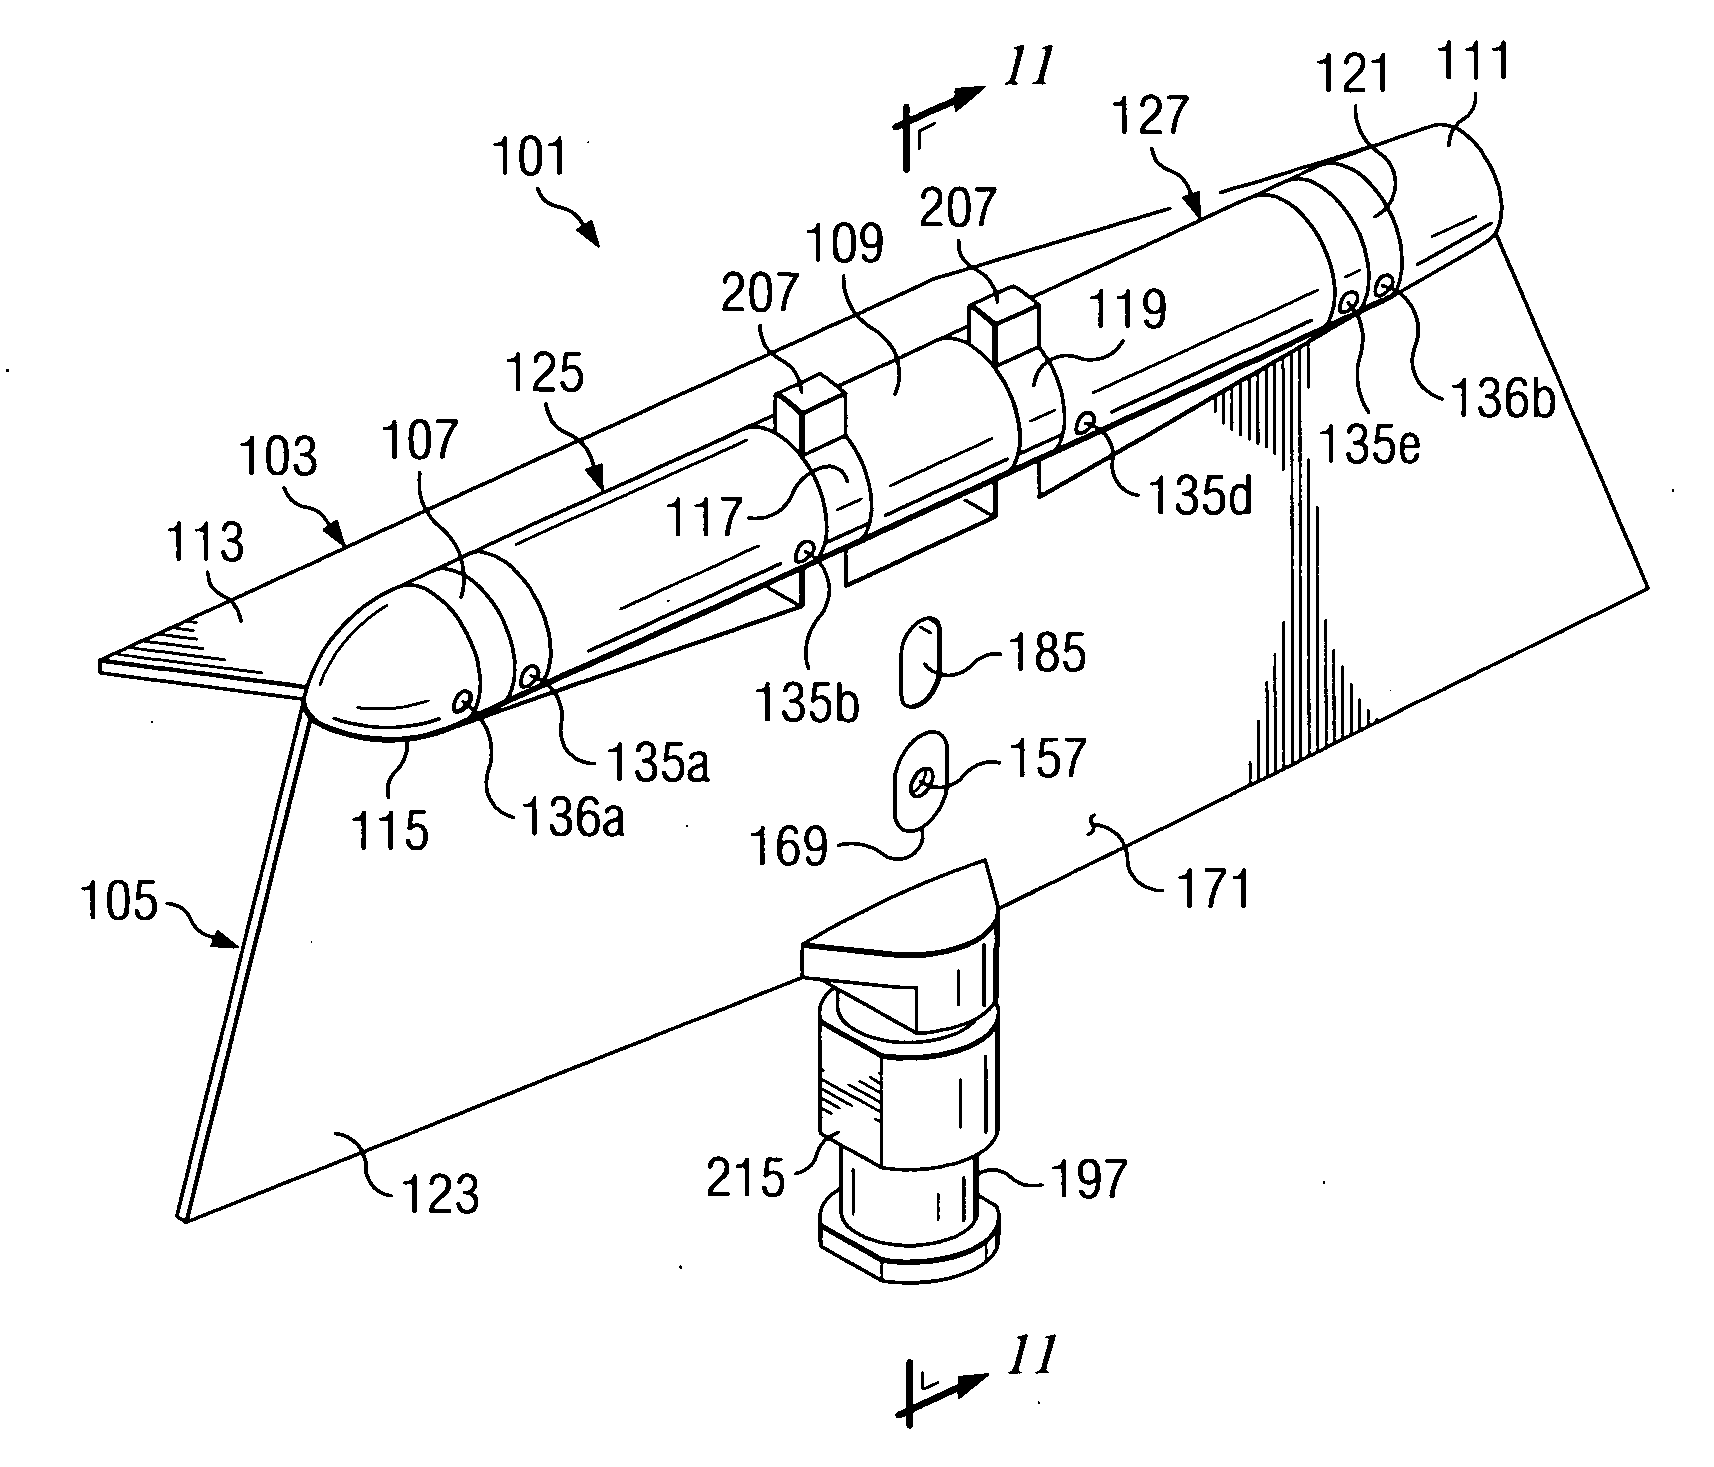 Foldable, lockable control surface and method of using same